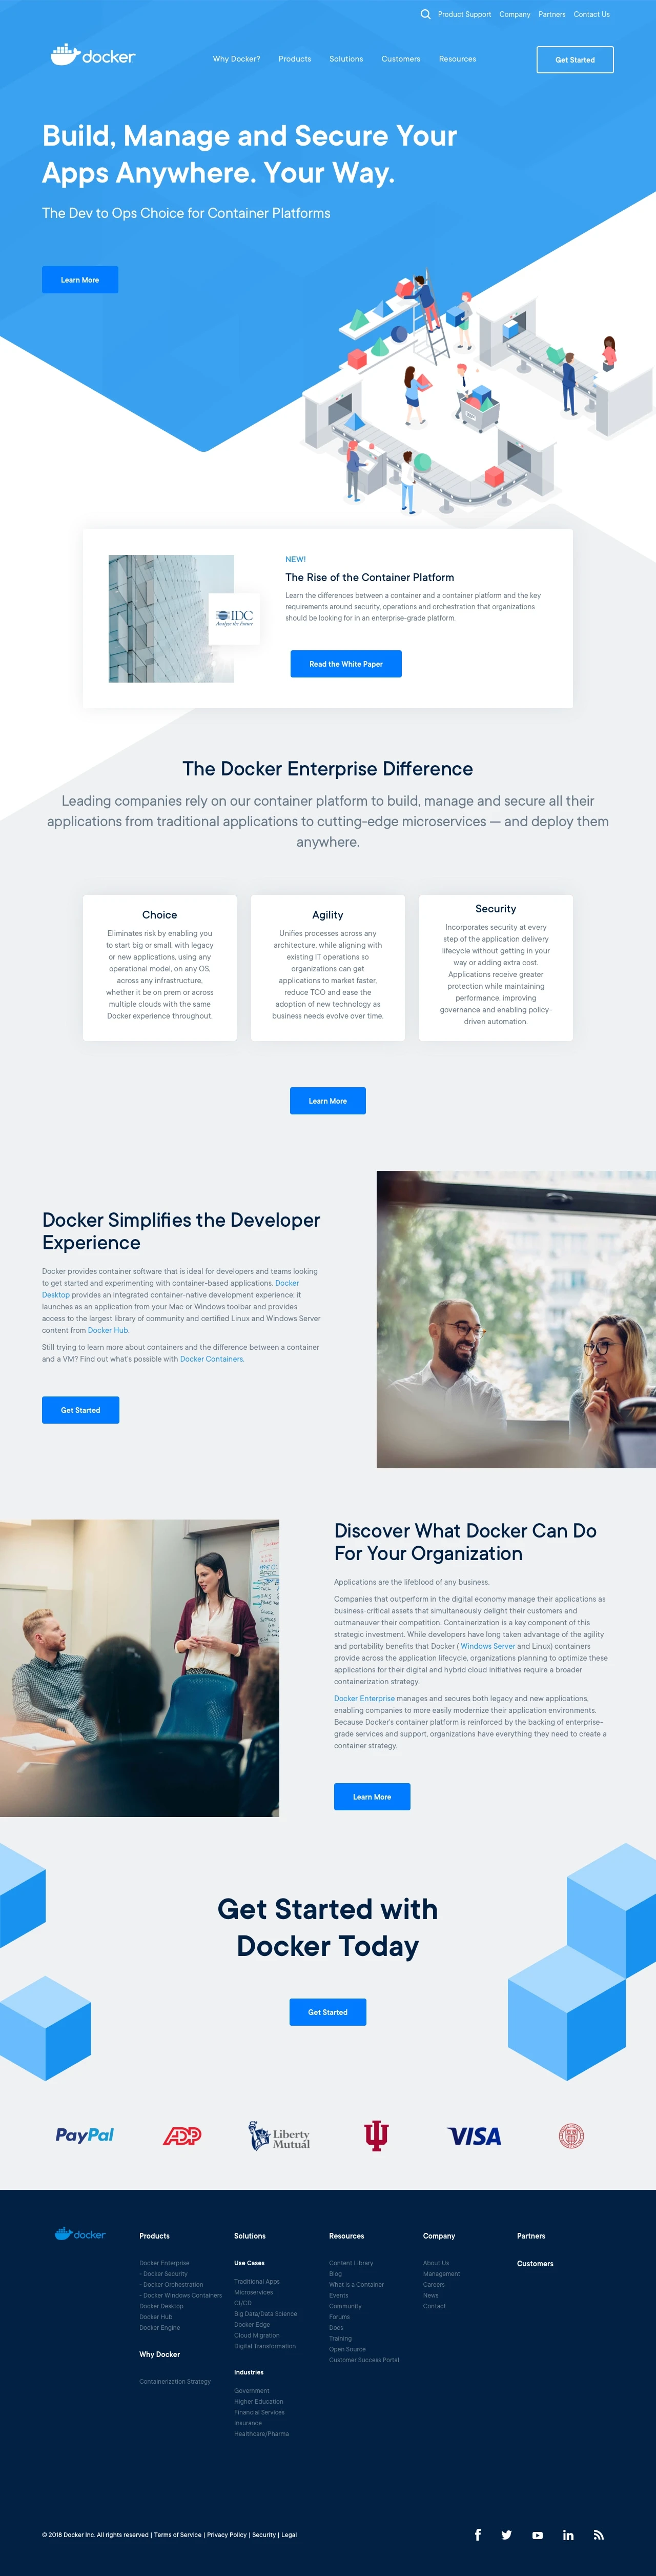 Docker Landing Page Example: Docker is an open platform for developers and sysadmins to build, ship, and run distributed applications, whether on laptops, data center VMs, or the cloud.